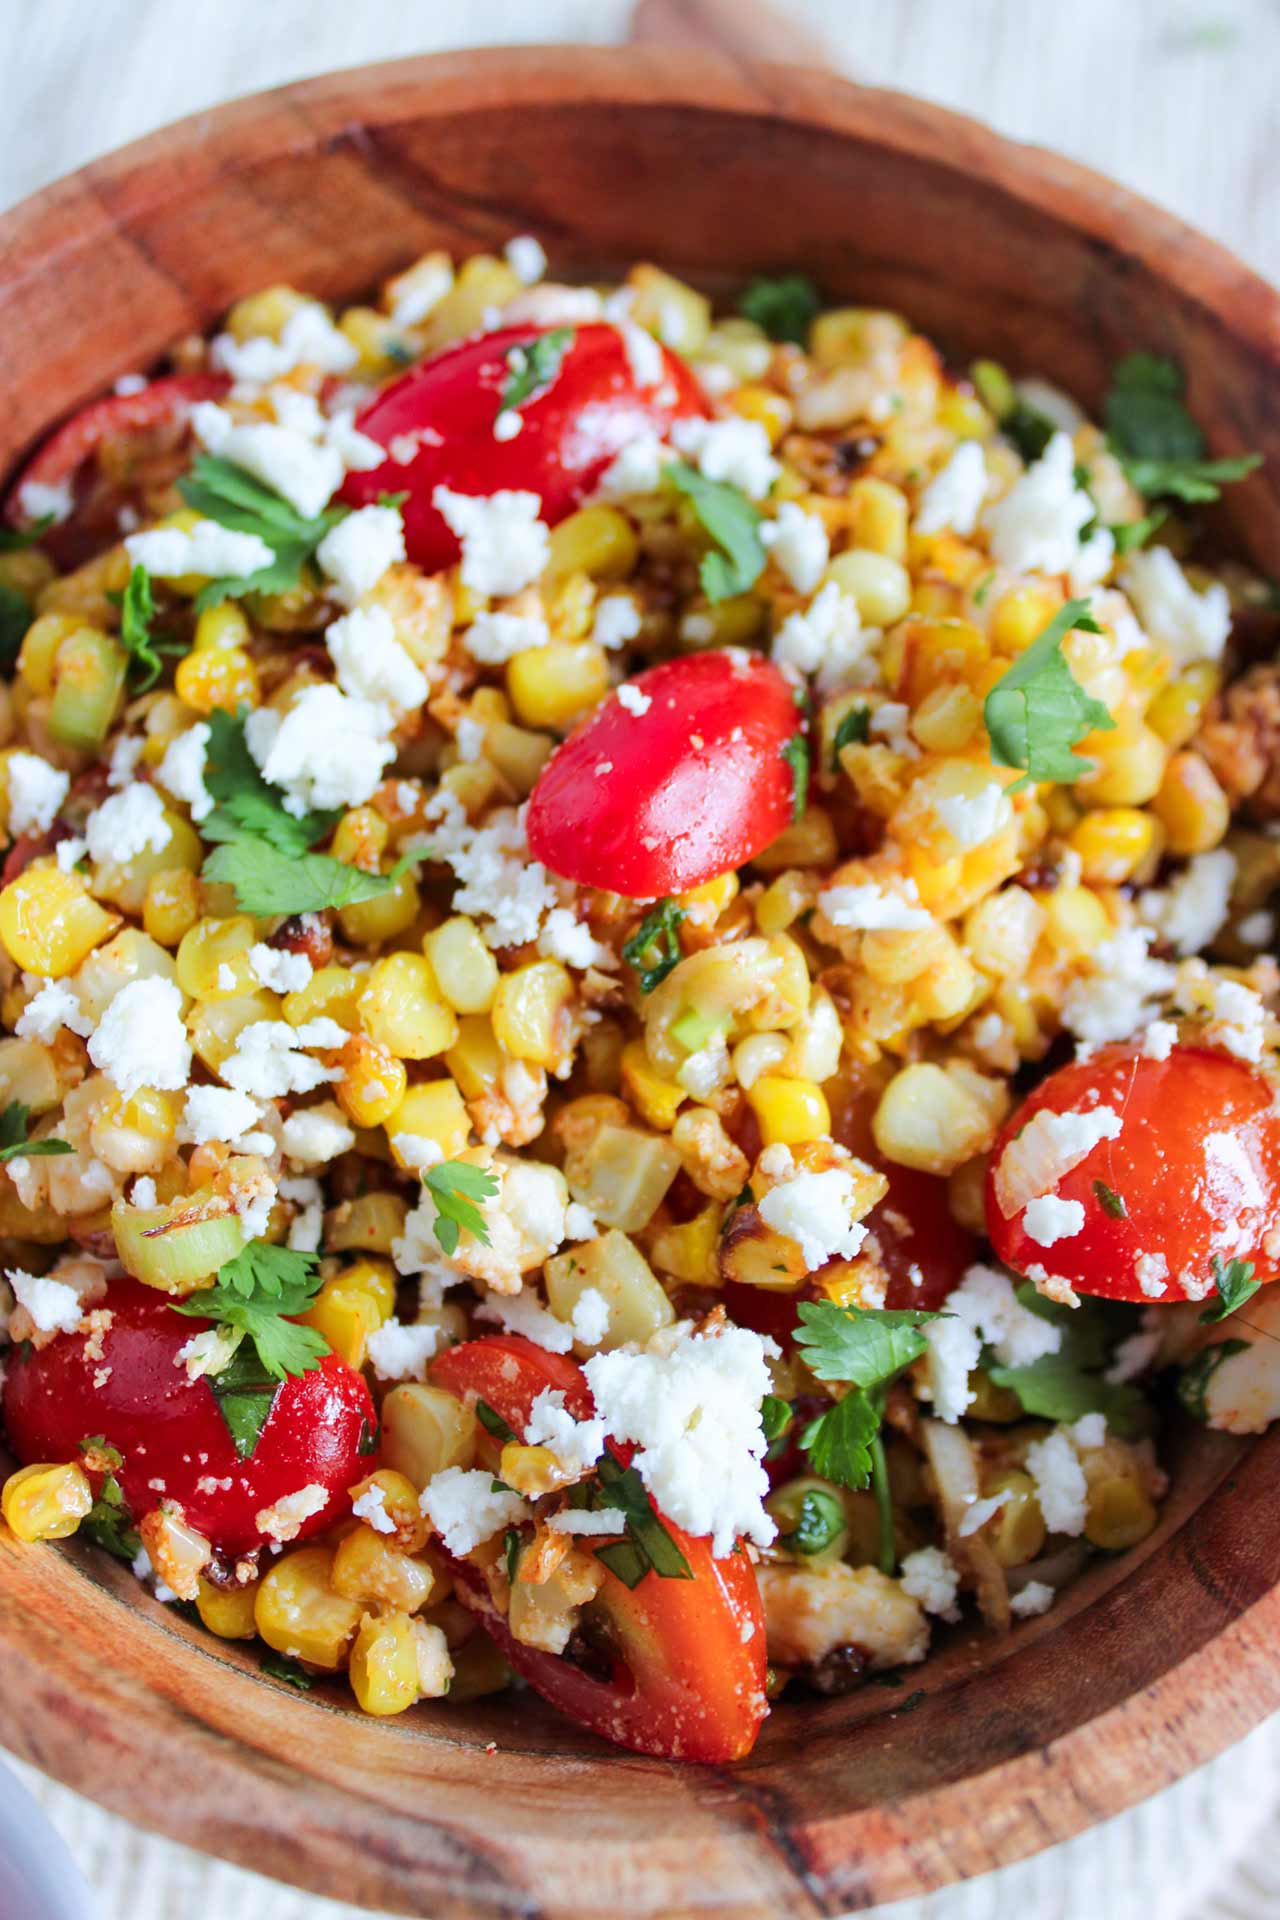 A side view of a wood bowl filled with Roasted Corn Salad.